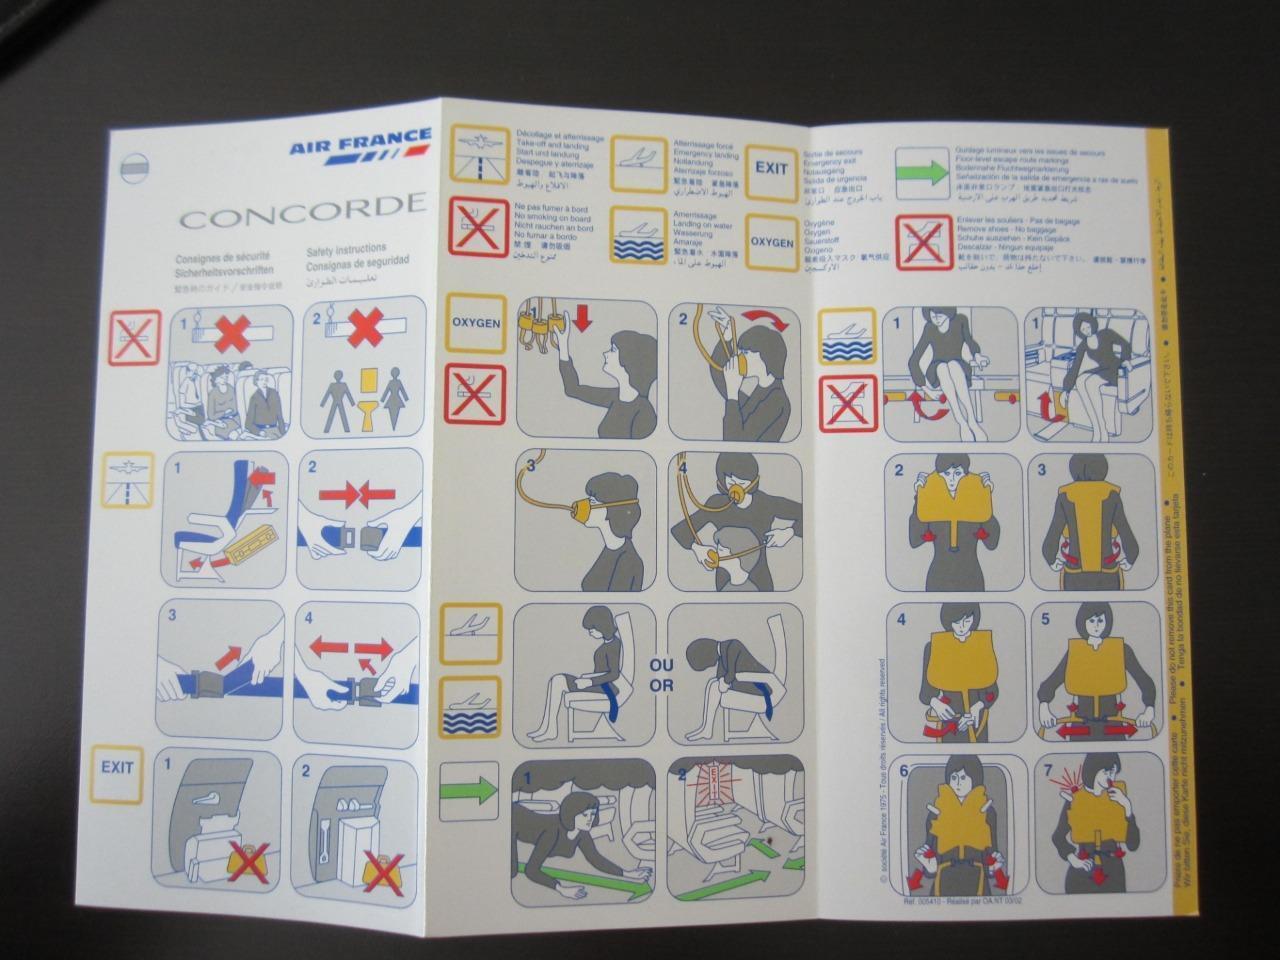 AIR FRANCE CONCORDE SAFETY CARD MINT ORIGINAL CONDITION FINAL ISSUE 03/02 RARE